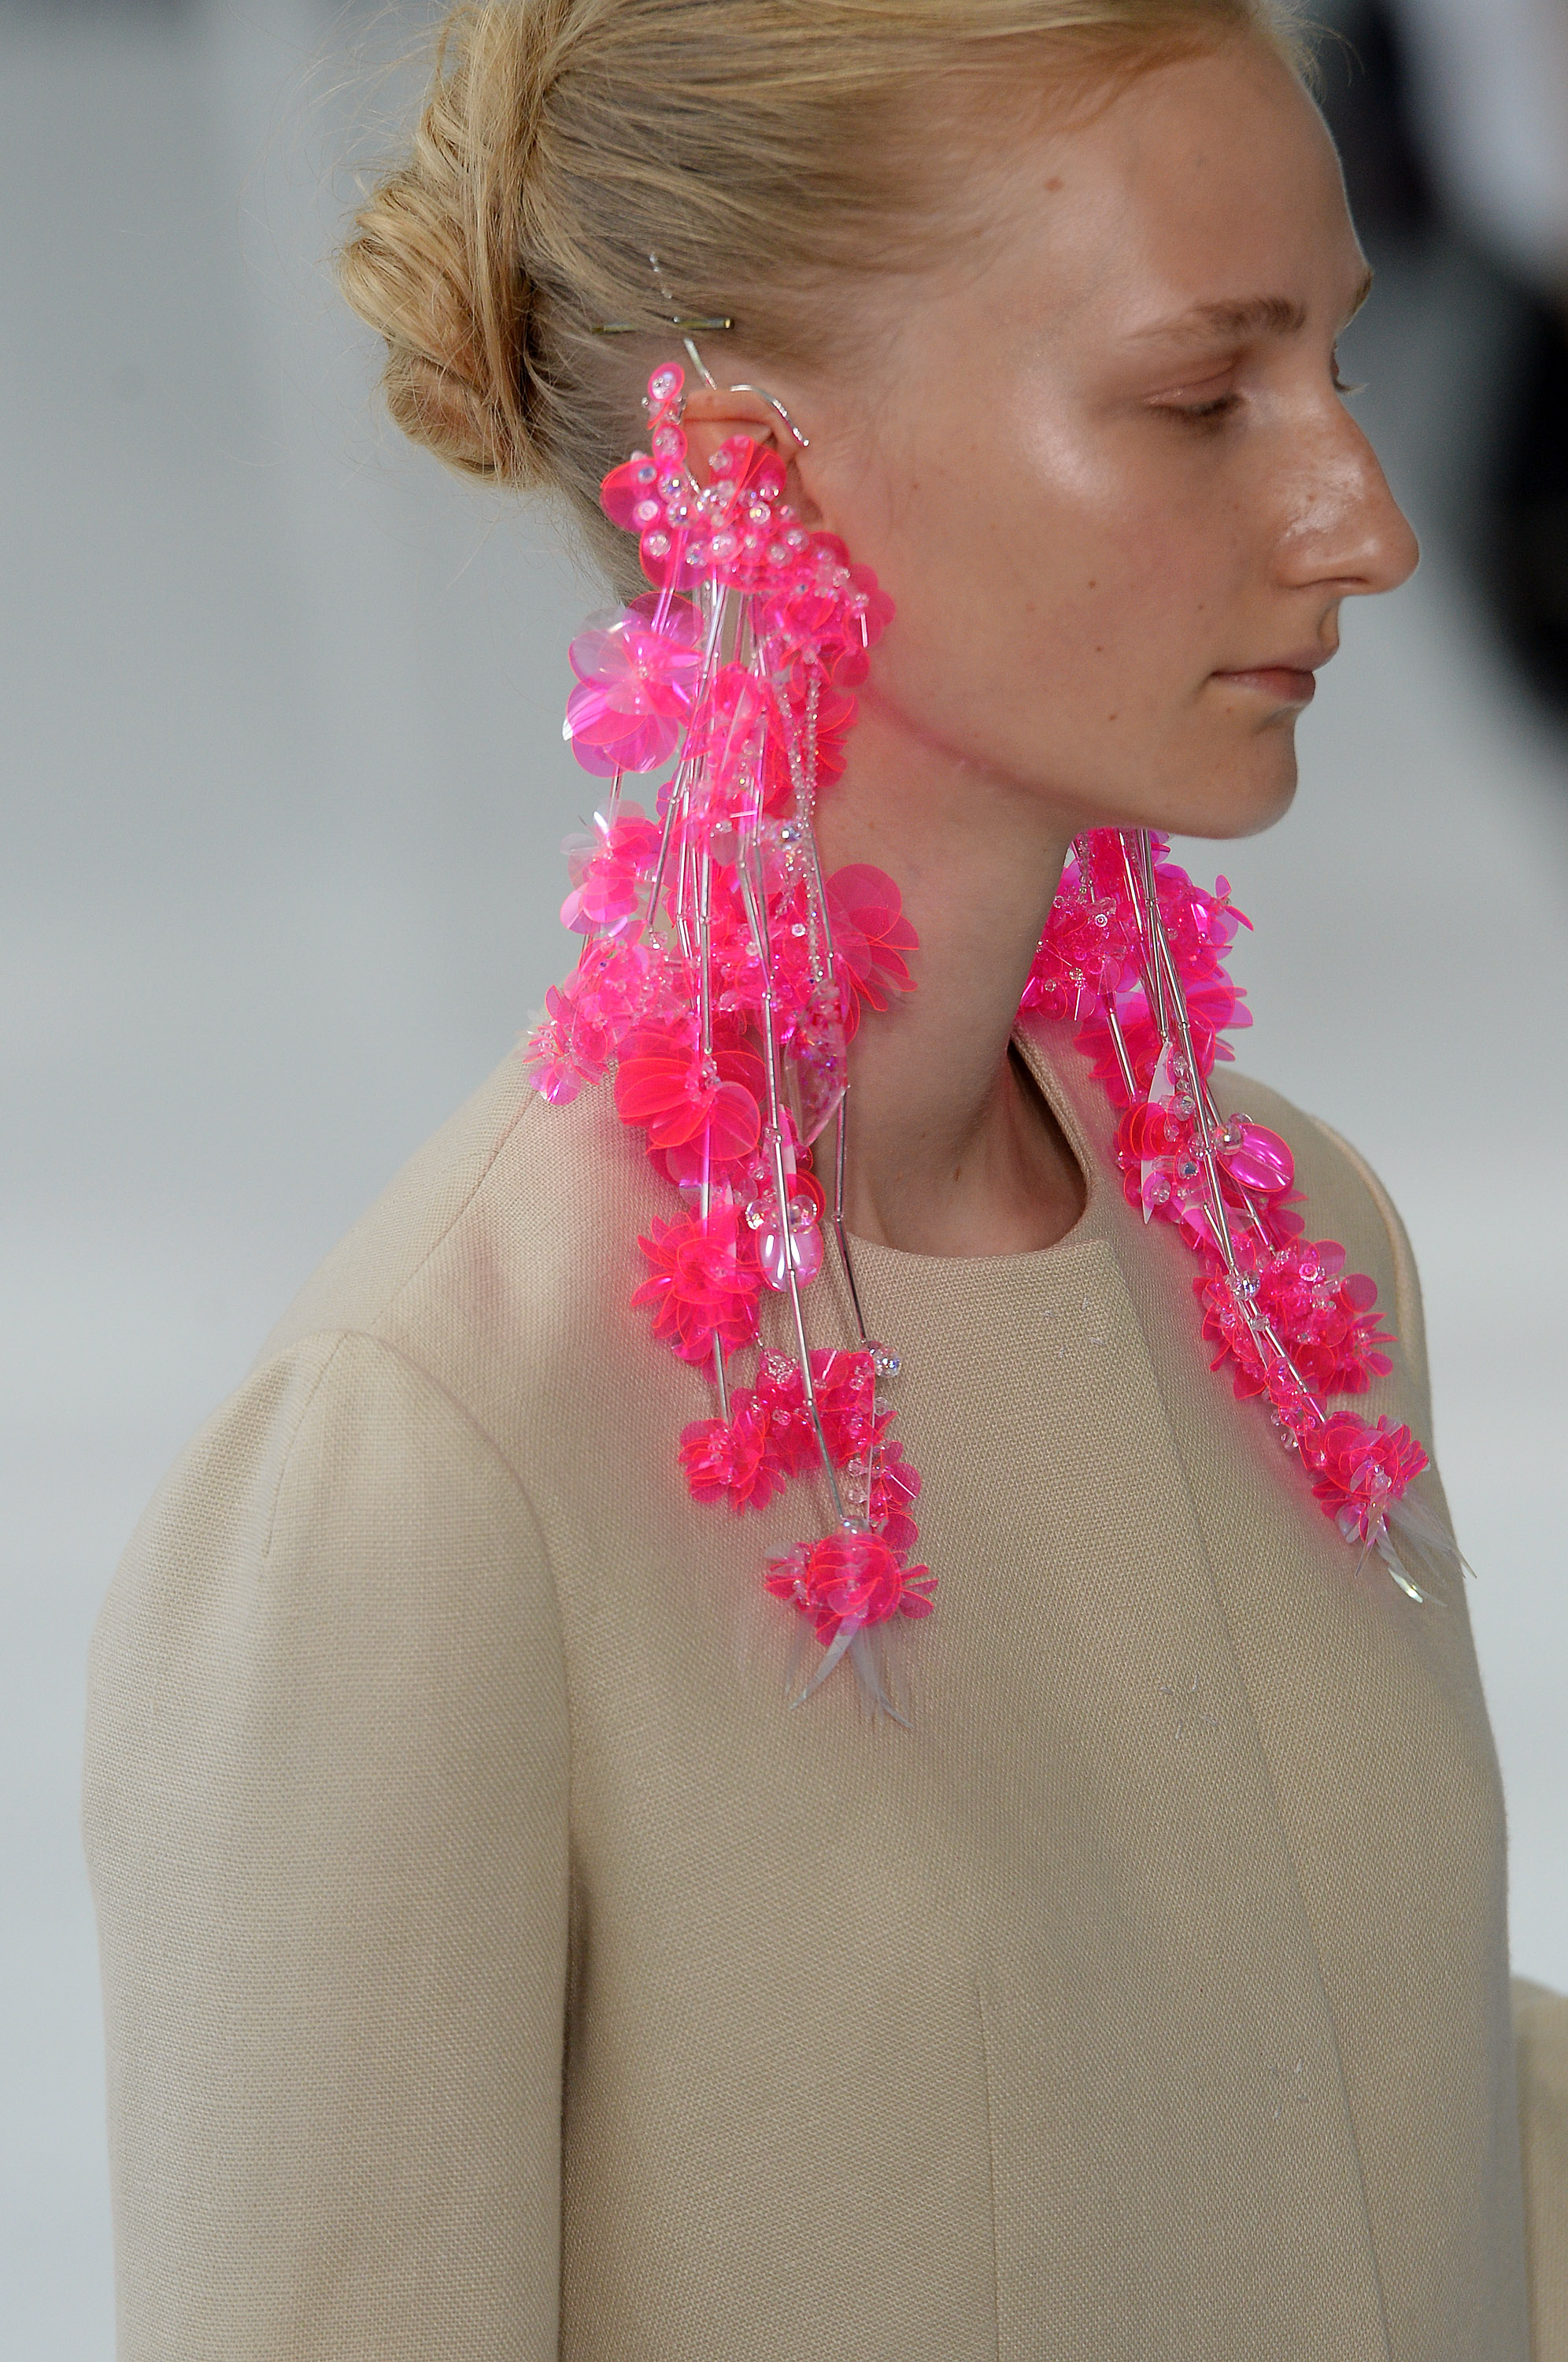 NEW YORK, NY - SEPTEMBER 14: Accessories a jewelry detail on the runway at the Delpozo Spring Summer 2017 fashion show during New York Fashion Week on September 14, 2016 in New York, United States. (Photo by Catwalking/Getty Images)